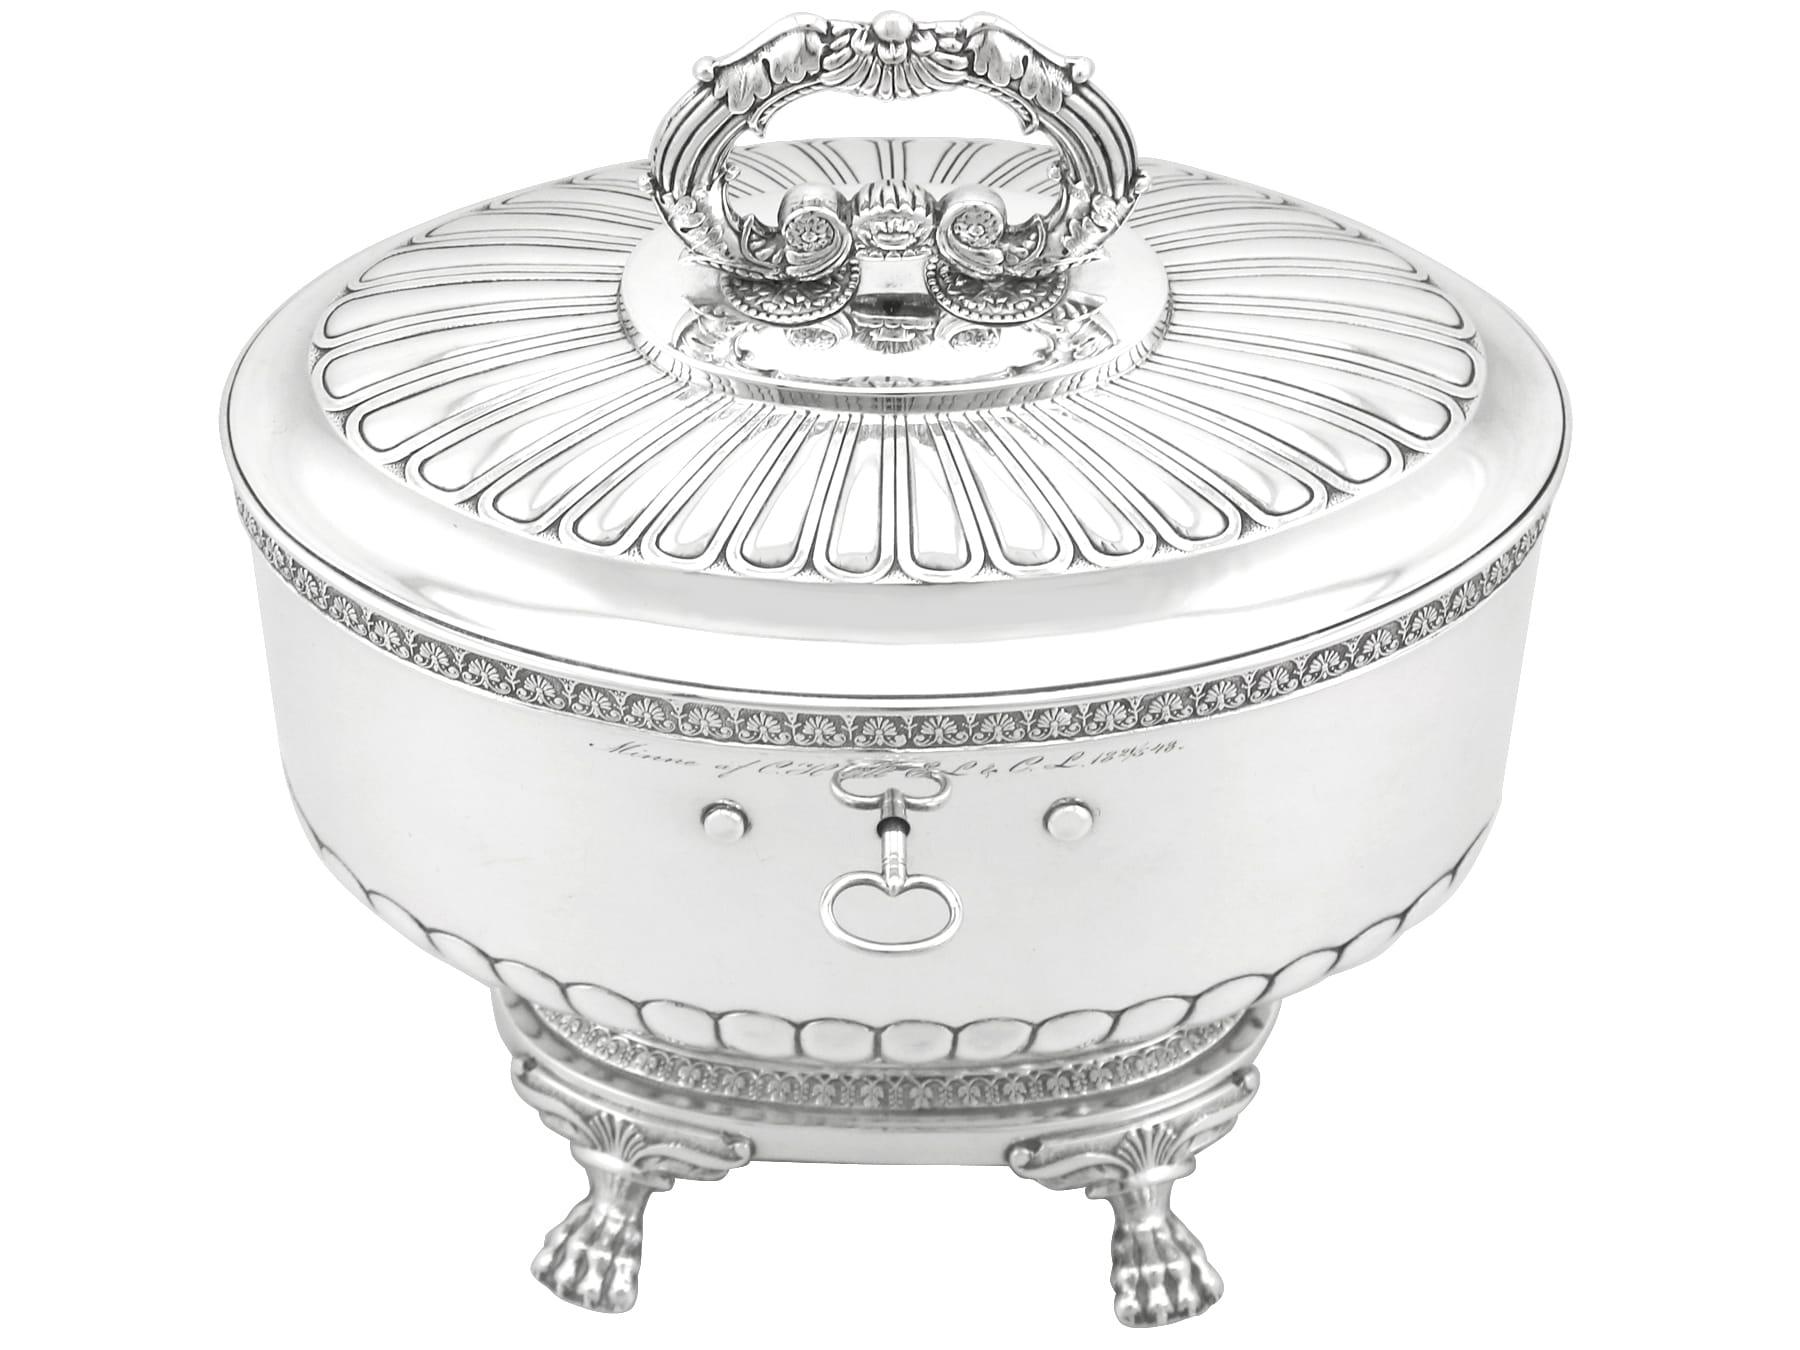 An exceptional, fine and impressive antique Swedish silver locking biscuit box; an addition to our silver teaware collection

This exceptional antique 19th century Swedish silver locking biscuit box has an oval rounded form, onto a swept pedestal